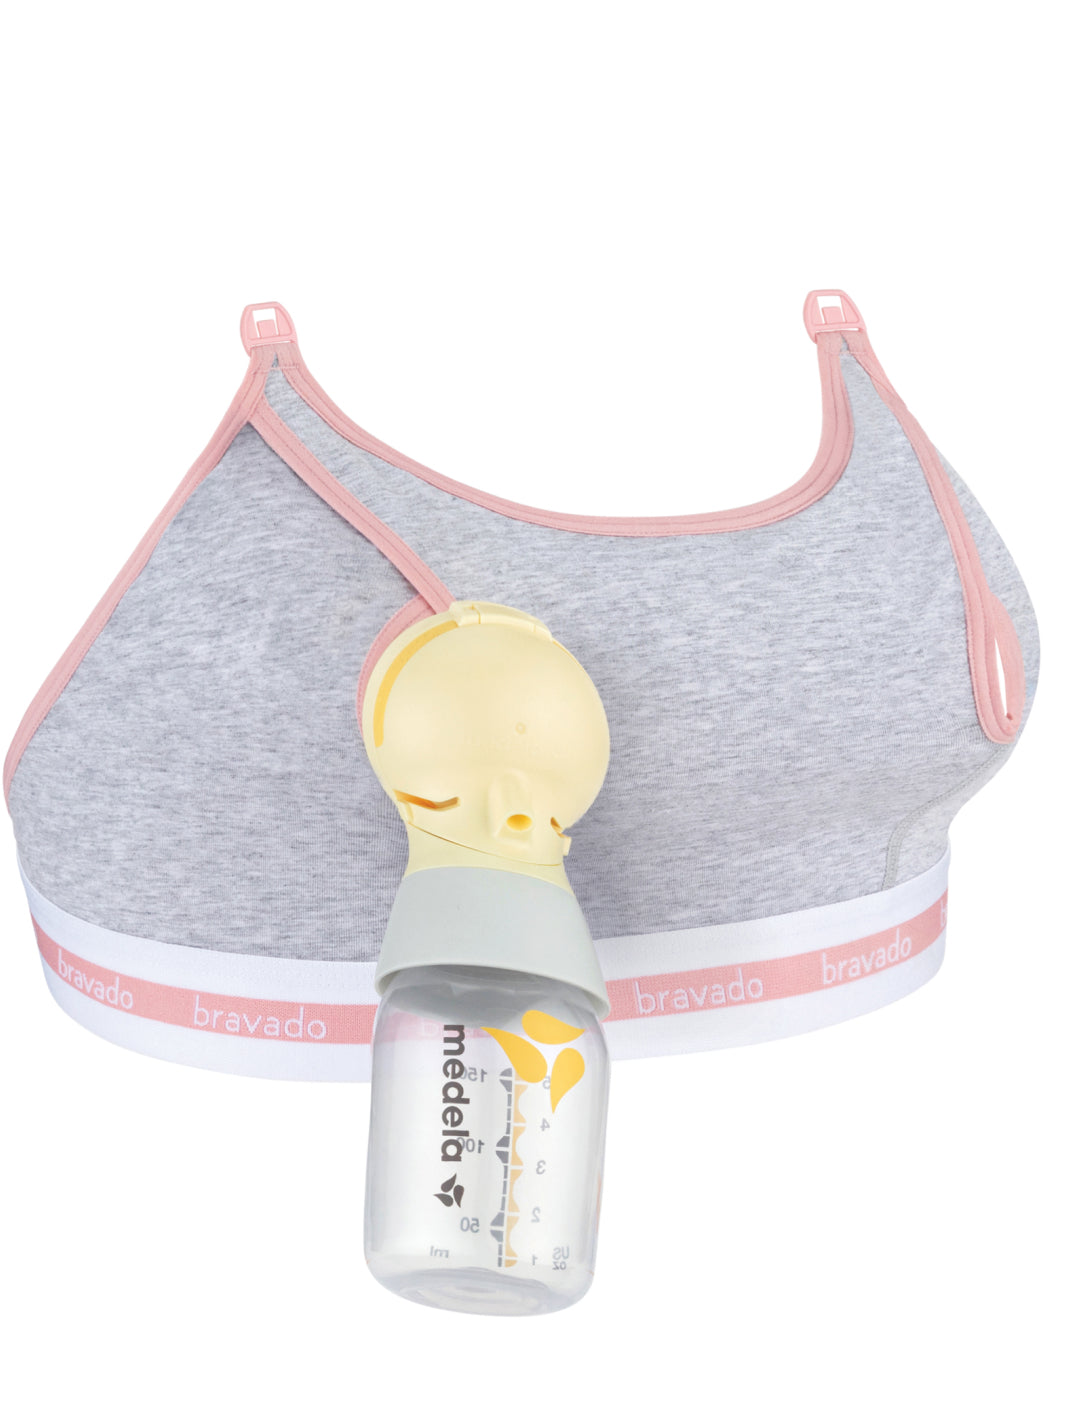 Baby Products Online - Hands Free Pumping Bra Maternity Bra for